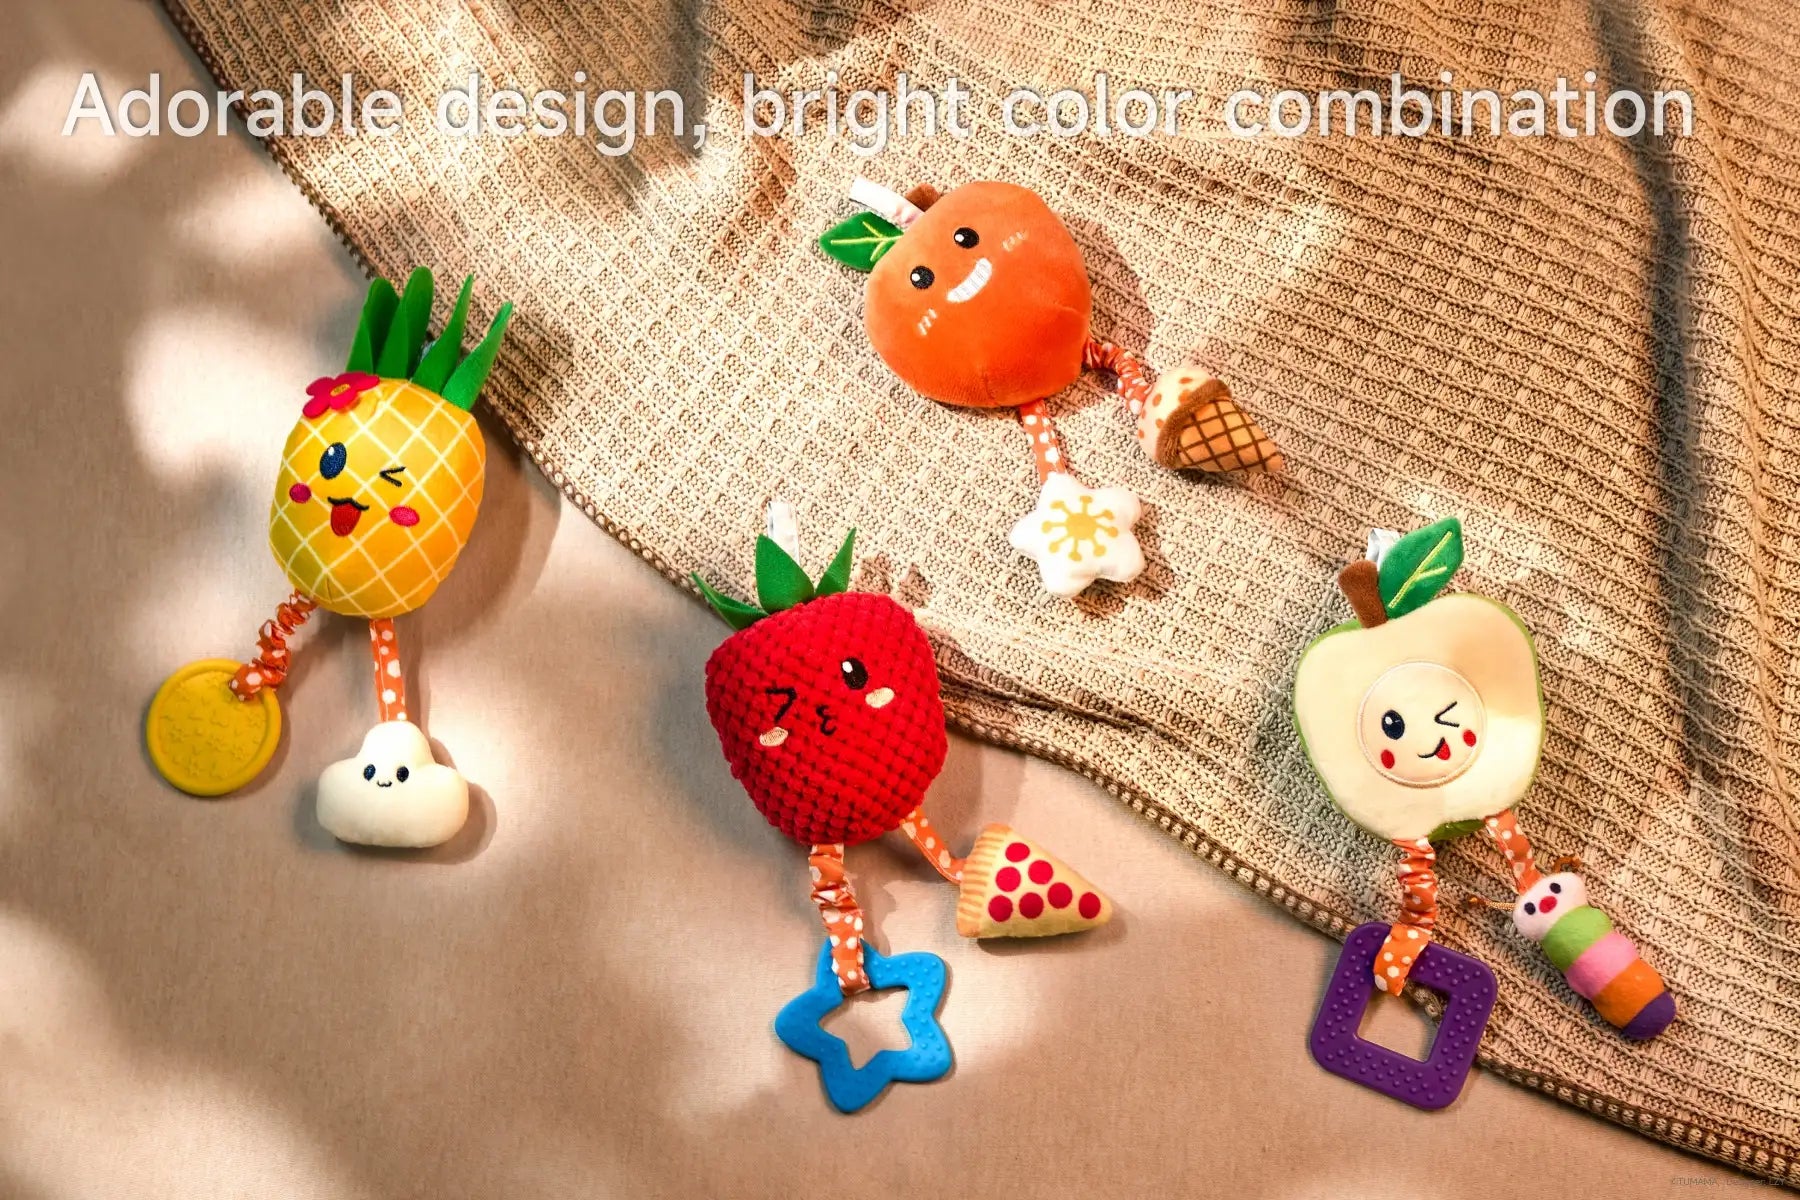 Hanging fruit rattles for sensory play in crib and stroller